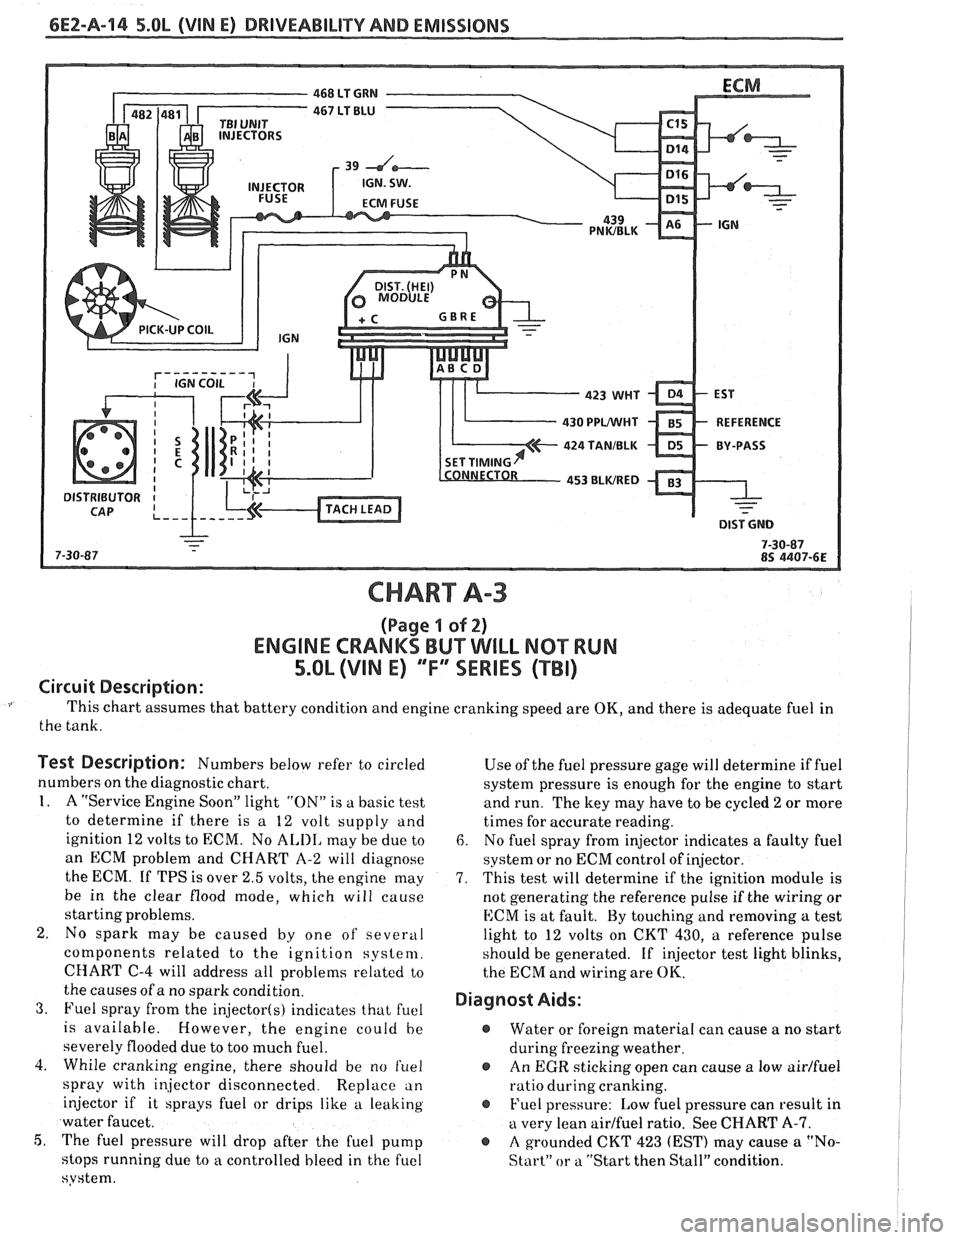 PONTIAC FIERO 1988  Service Owners Guide 
6E2-A-114 5.OL (VIN E) DRIVEABILITY AND EMISSIONS 
CHART A-3 
(Page I of 2) 
ENGINE CRANKS BUT WILL NQ"TRUN 
5.OL (VIM E) "F"" SERlES (TBI) 
Circuit Description: 
This chart  assumes  that battery  c